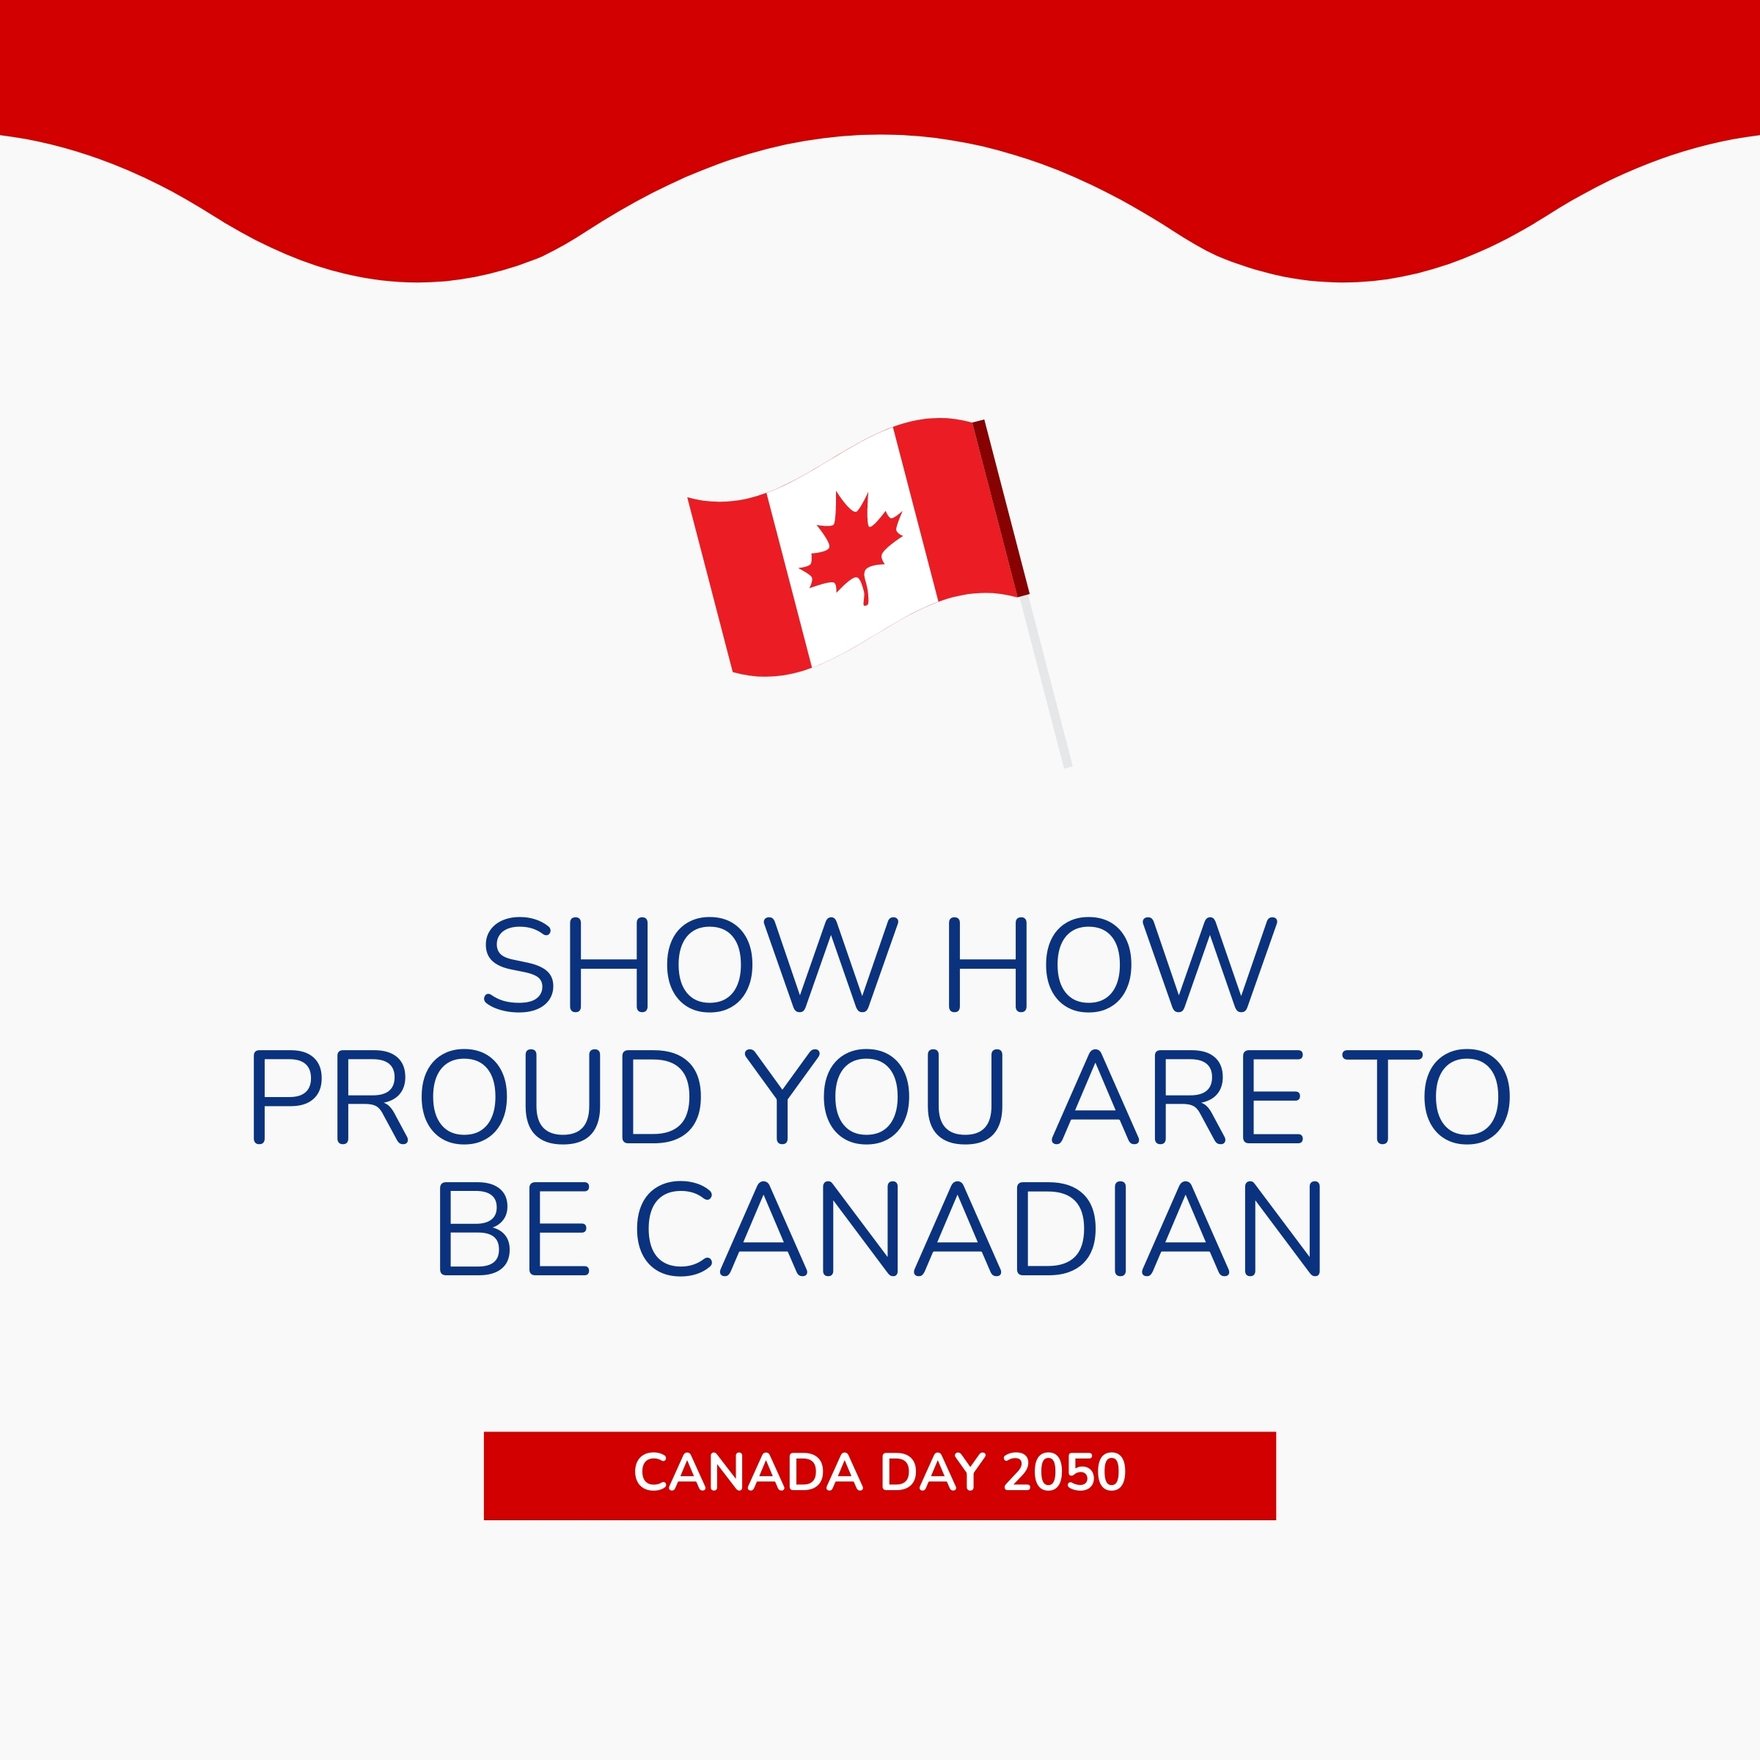 Free Canada Day Whatsapp Post in Illustrator, PSD, EPS, SVG, PNG, JPEG